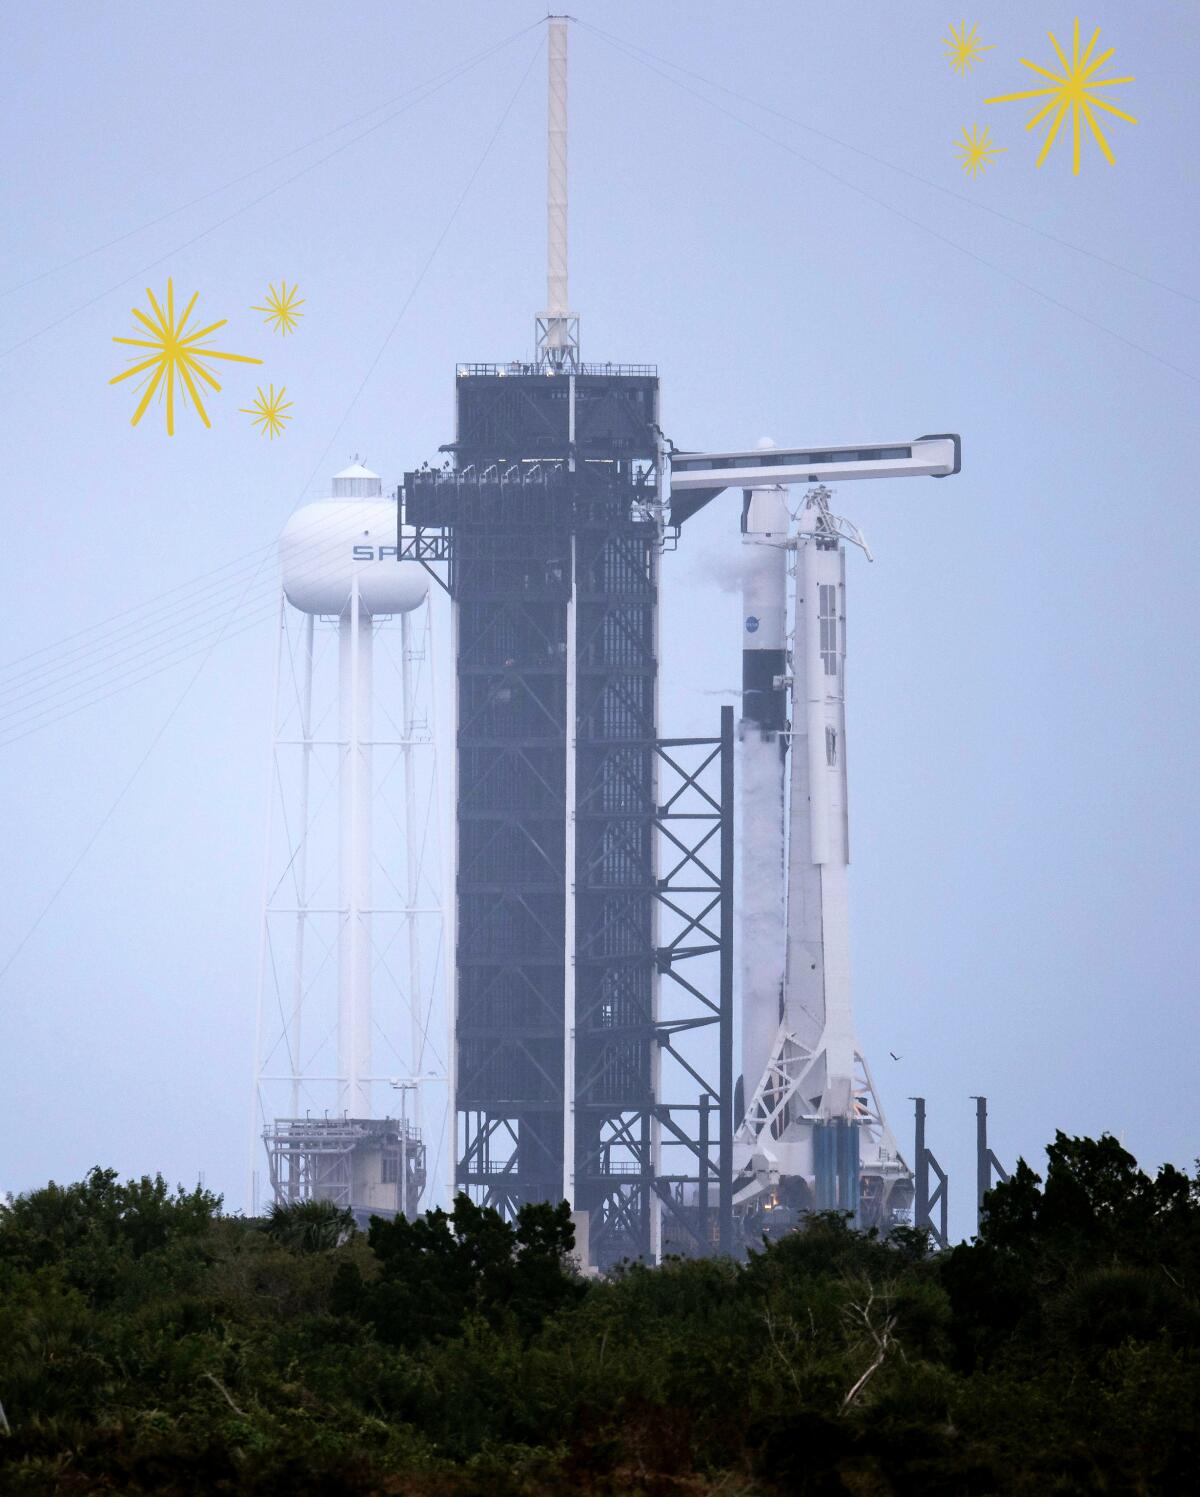 A SpaceX Falcon 9 rocket with the company's Crew Dragon capsule attached sits on the launch pad at the Kennedy Space Center